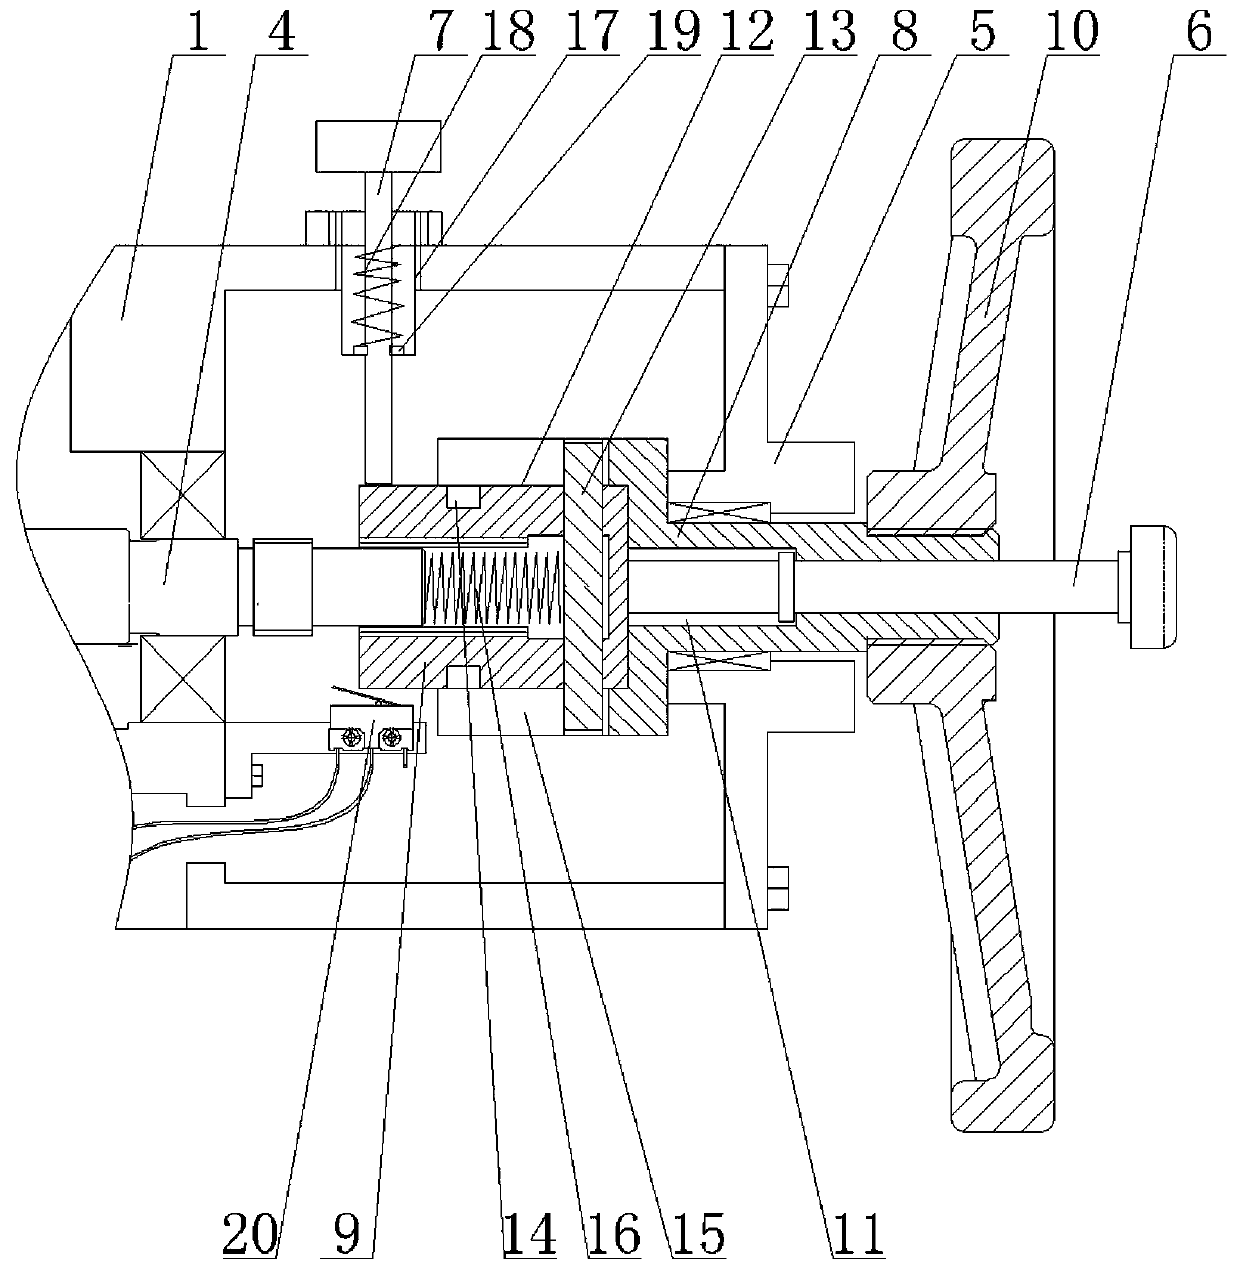 Manual engagement and disengagement mechanism of electric actuator